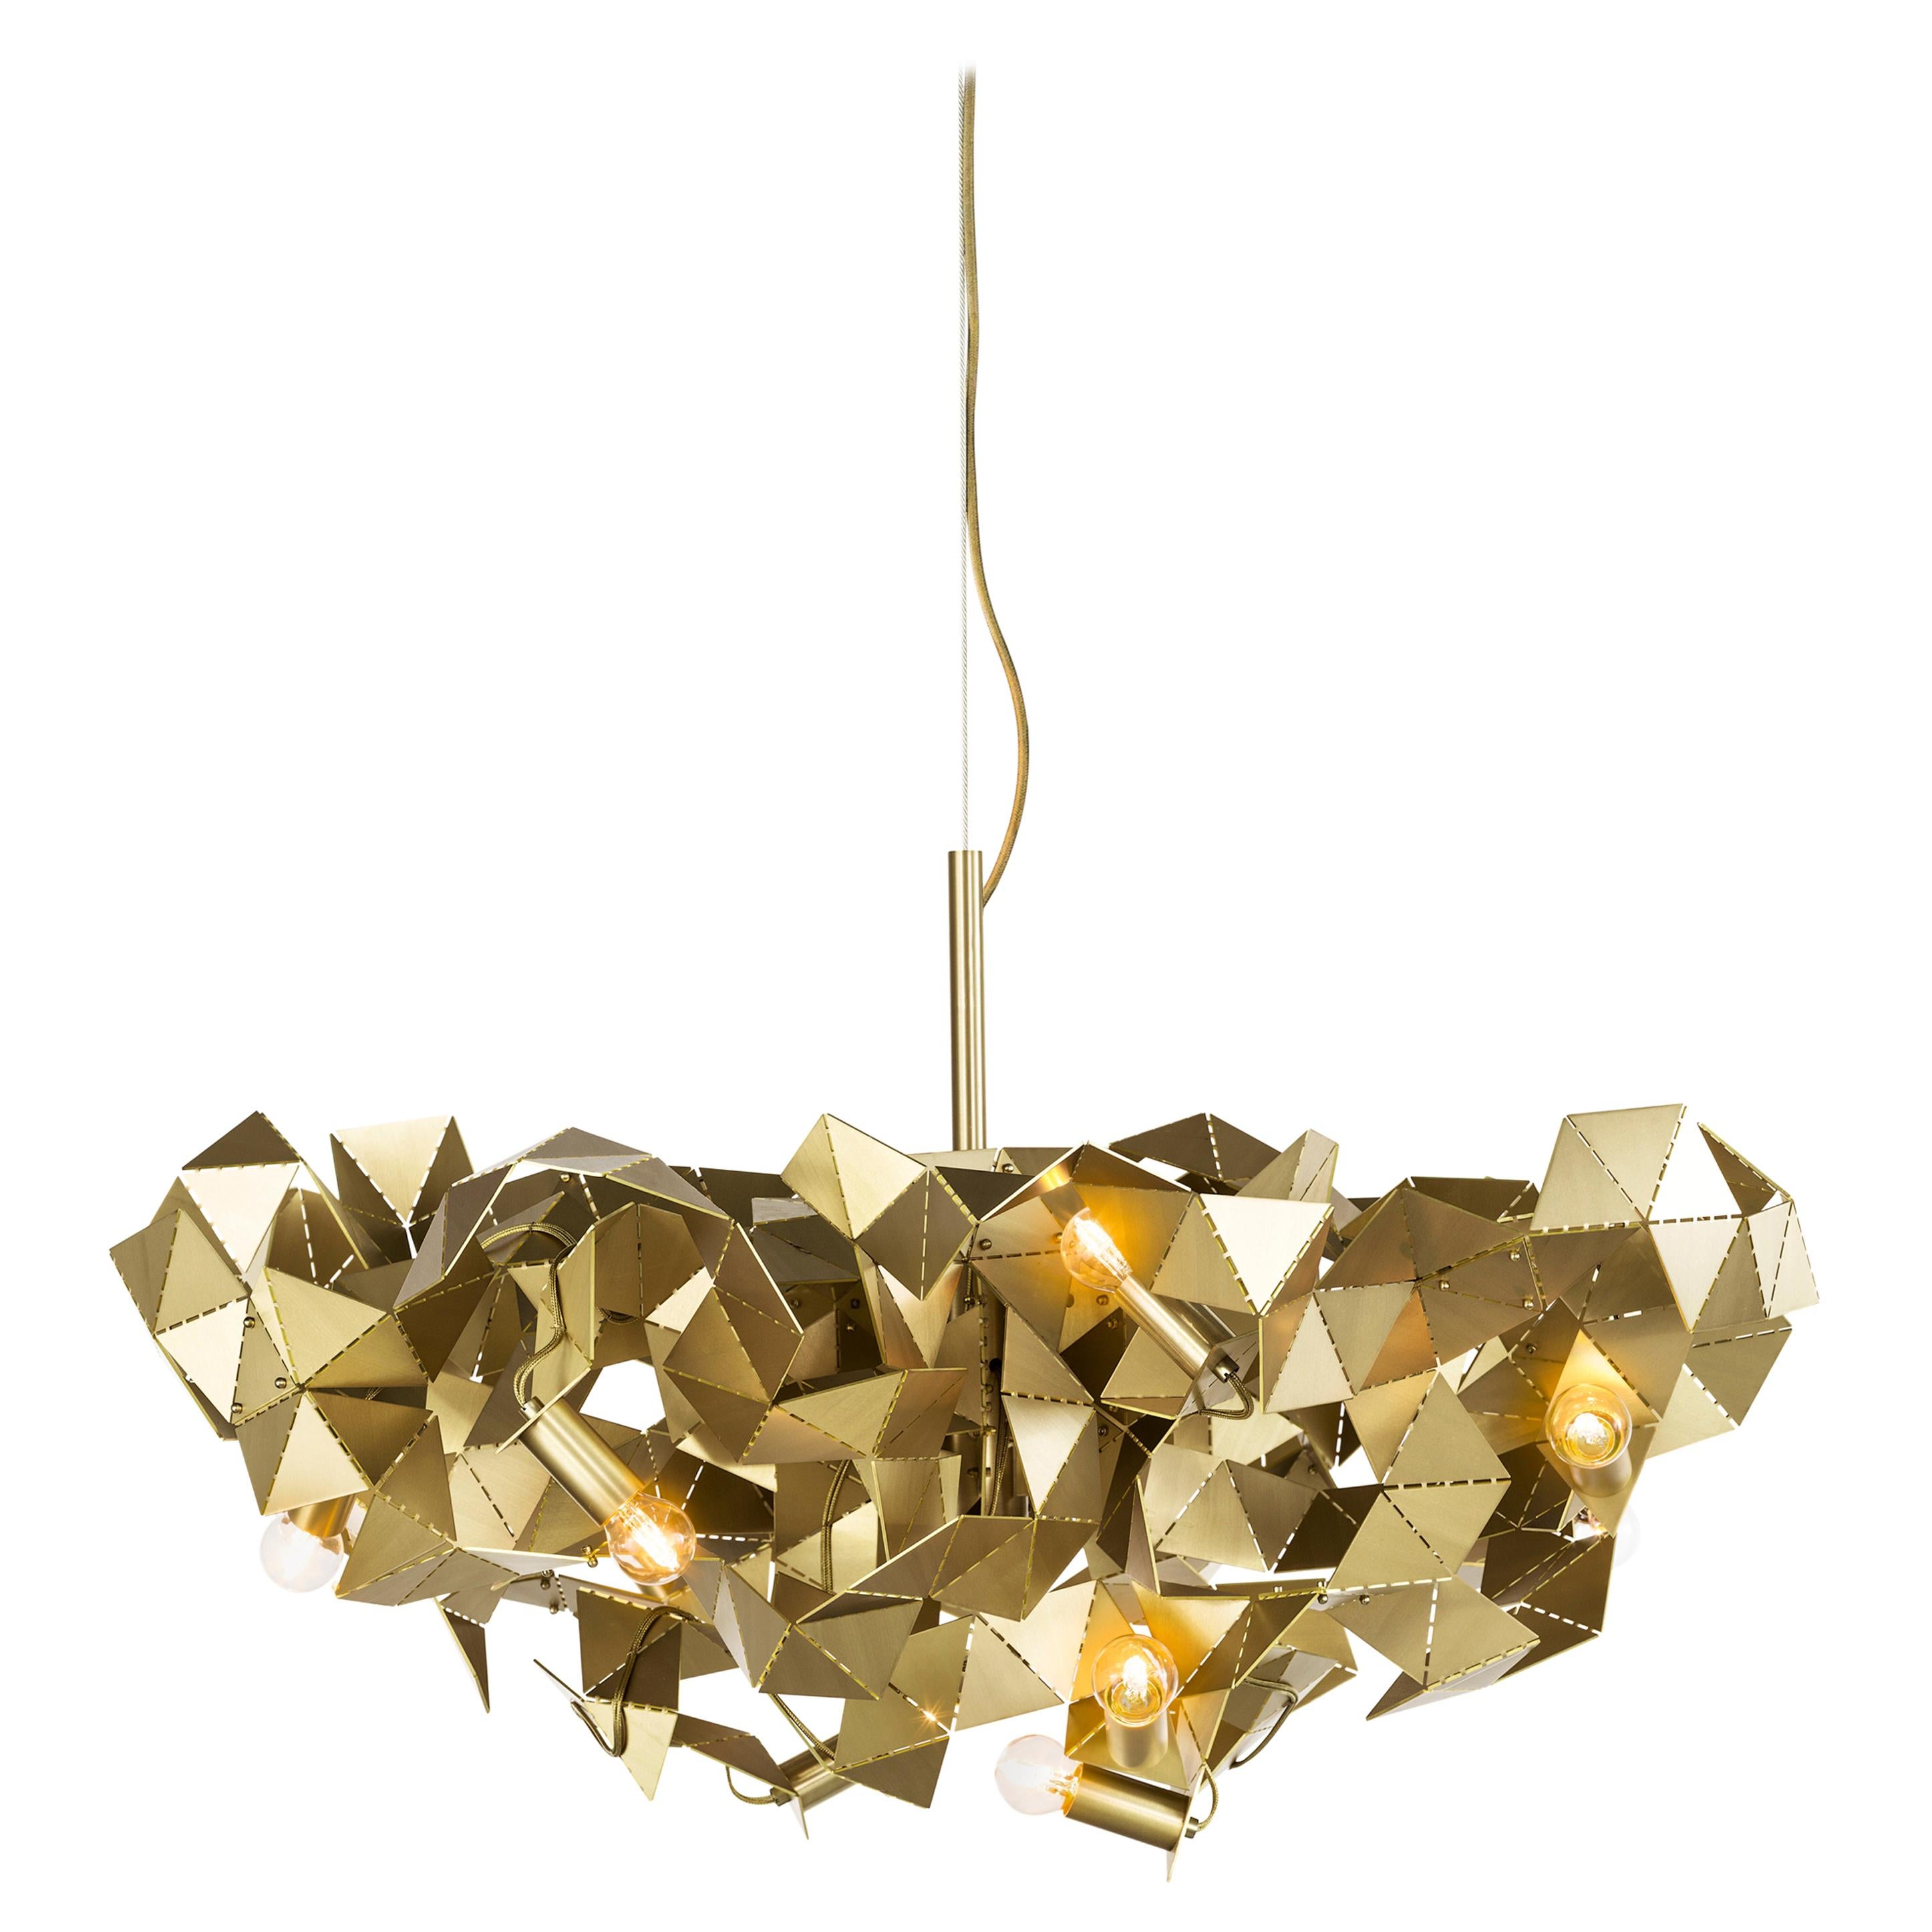 Modern Chandelier in a Brass Grinded Finish, Fractal Collection, by Brand Van